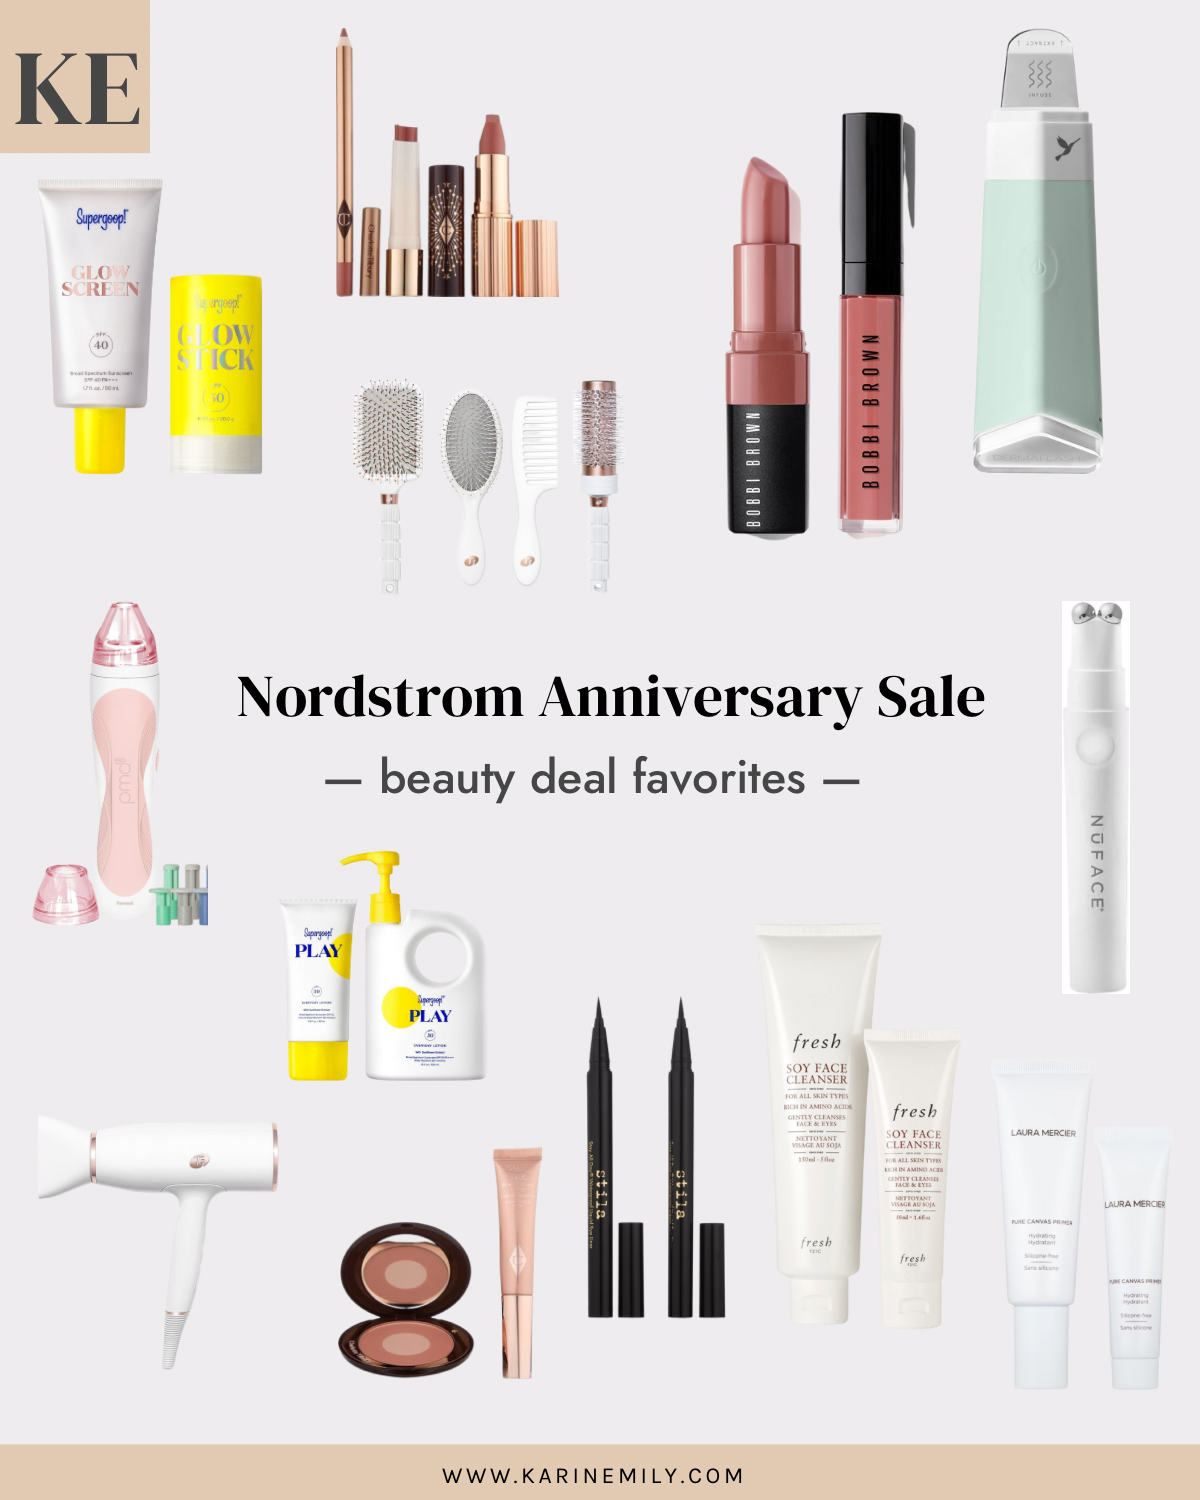 Karin Emily shares a collage of what's on her Nordstrom Anniversary Sale 2022 wishlist